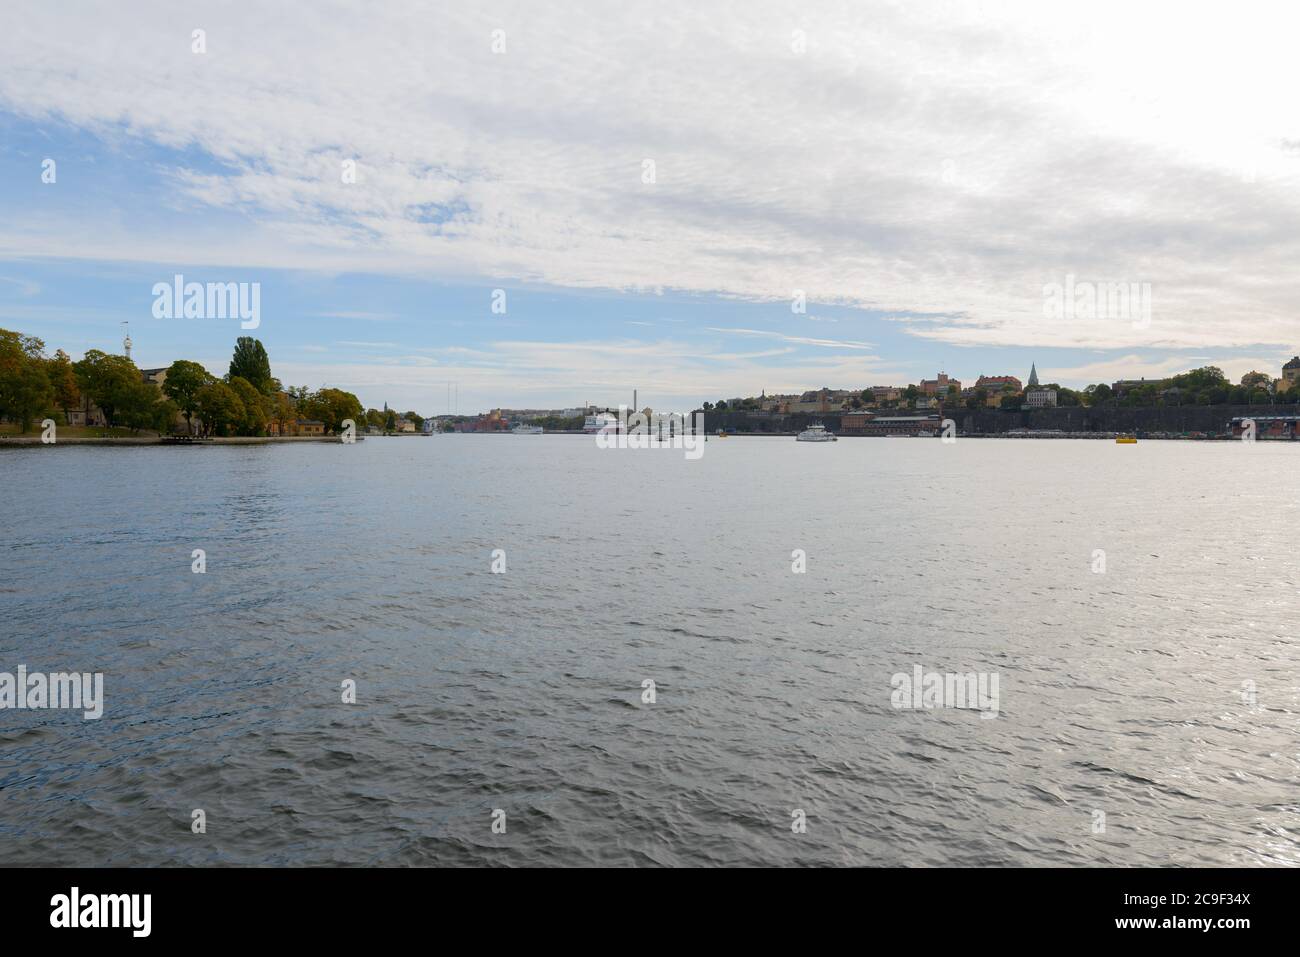 Portrait of city and lake against view of the sky in Stockholm, Sweden Stock Photo